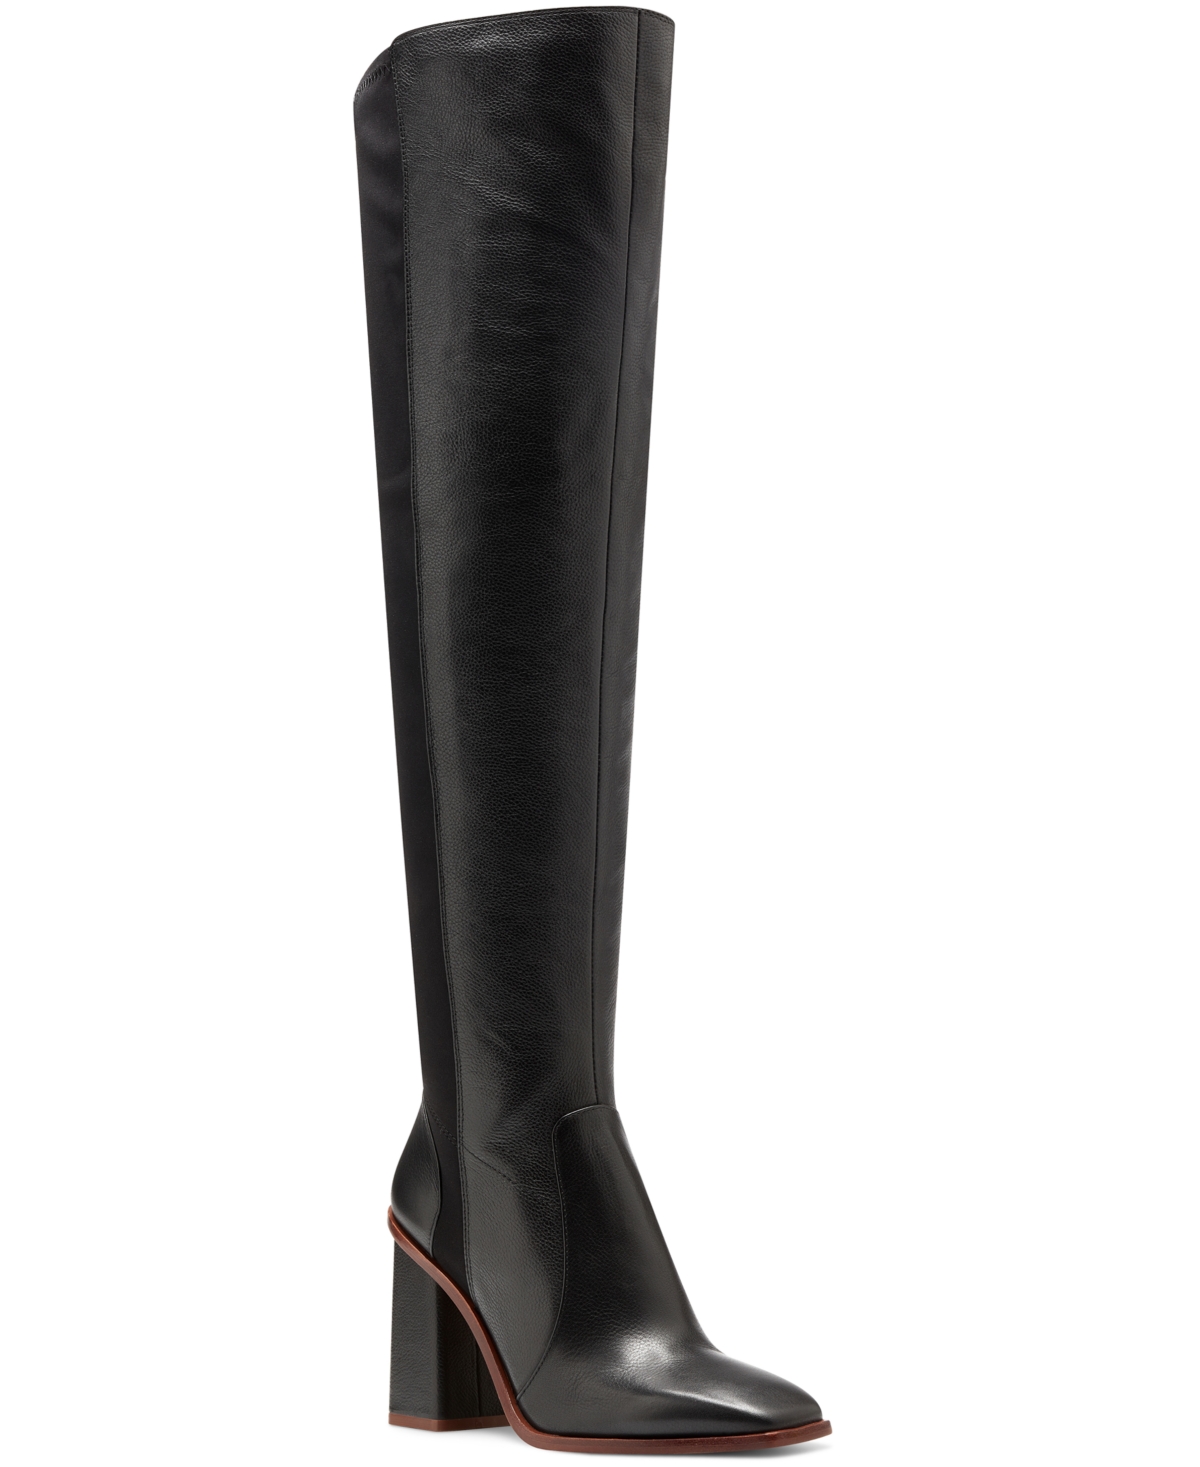 UPC 194307349525 product image for Vince Camuto Women's Dreven Over-the-Knee Boots Women's Shoes | upcitemdb.com